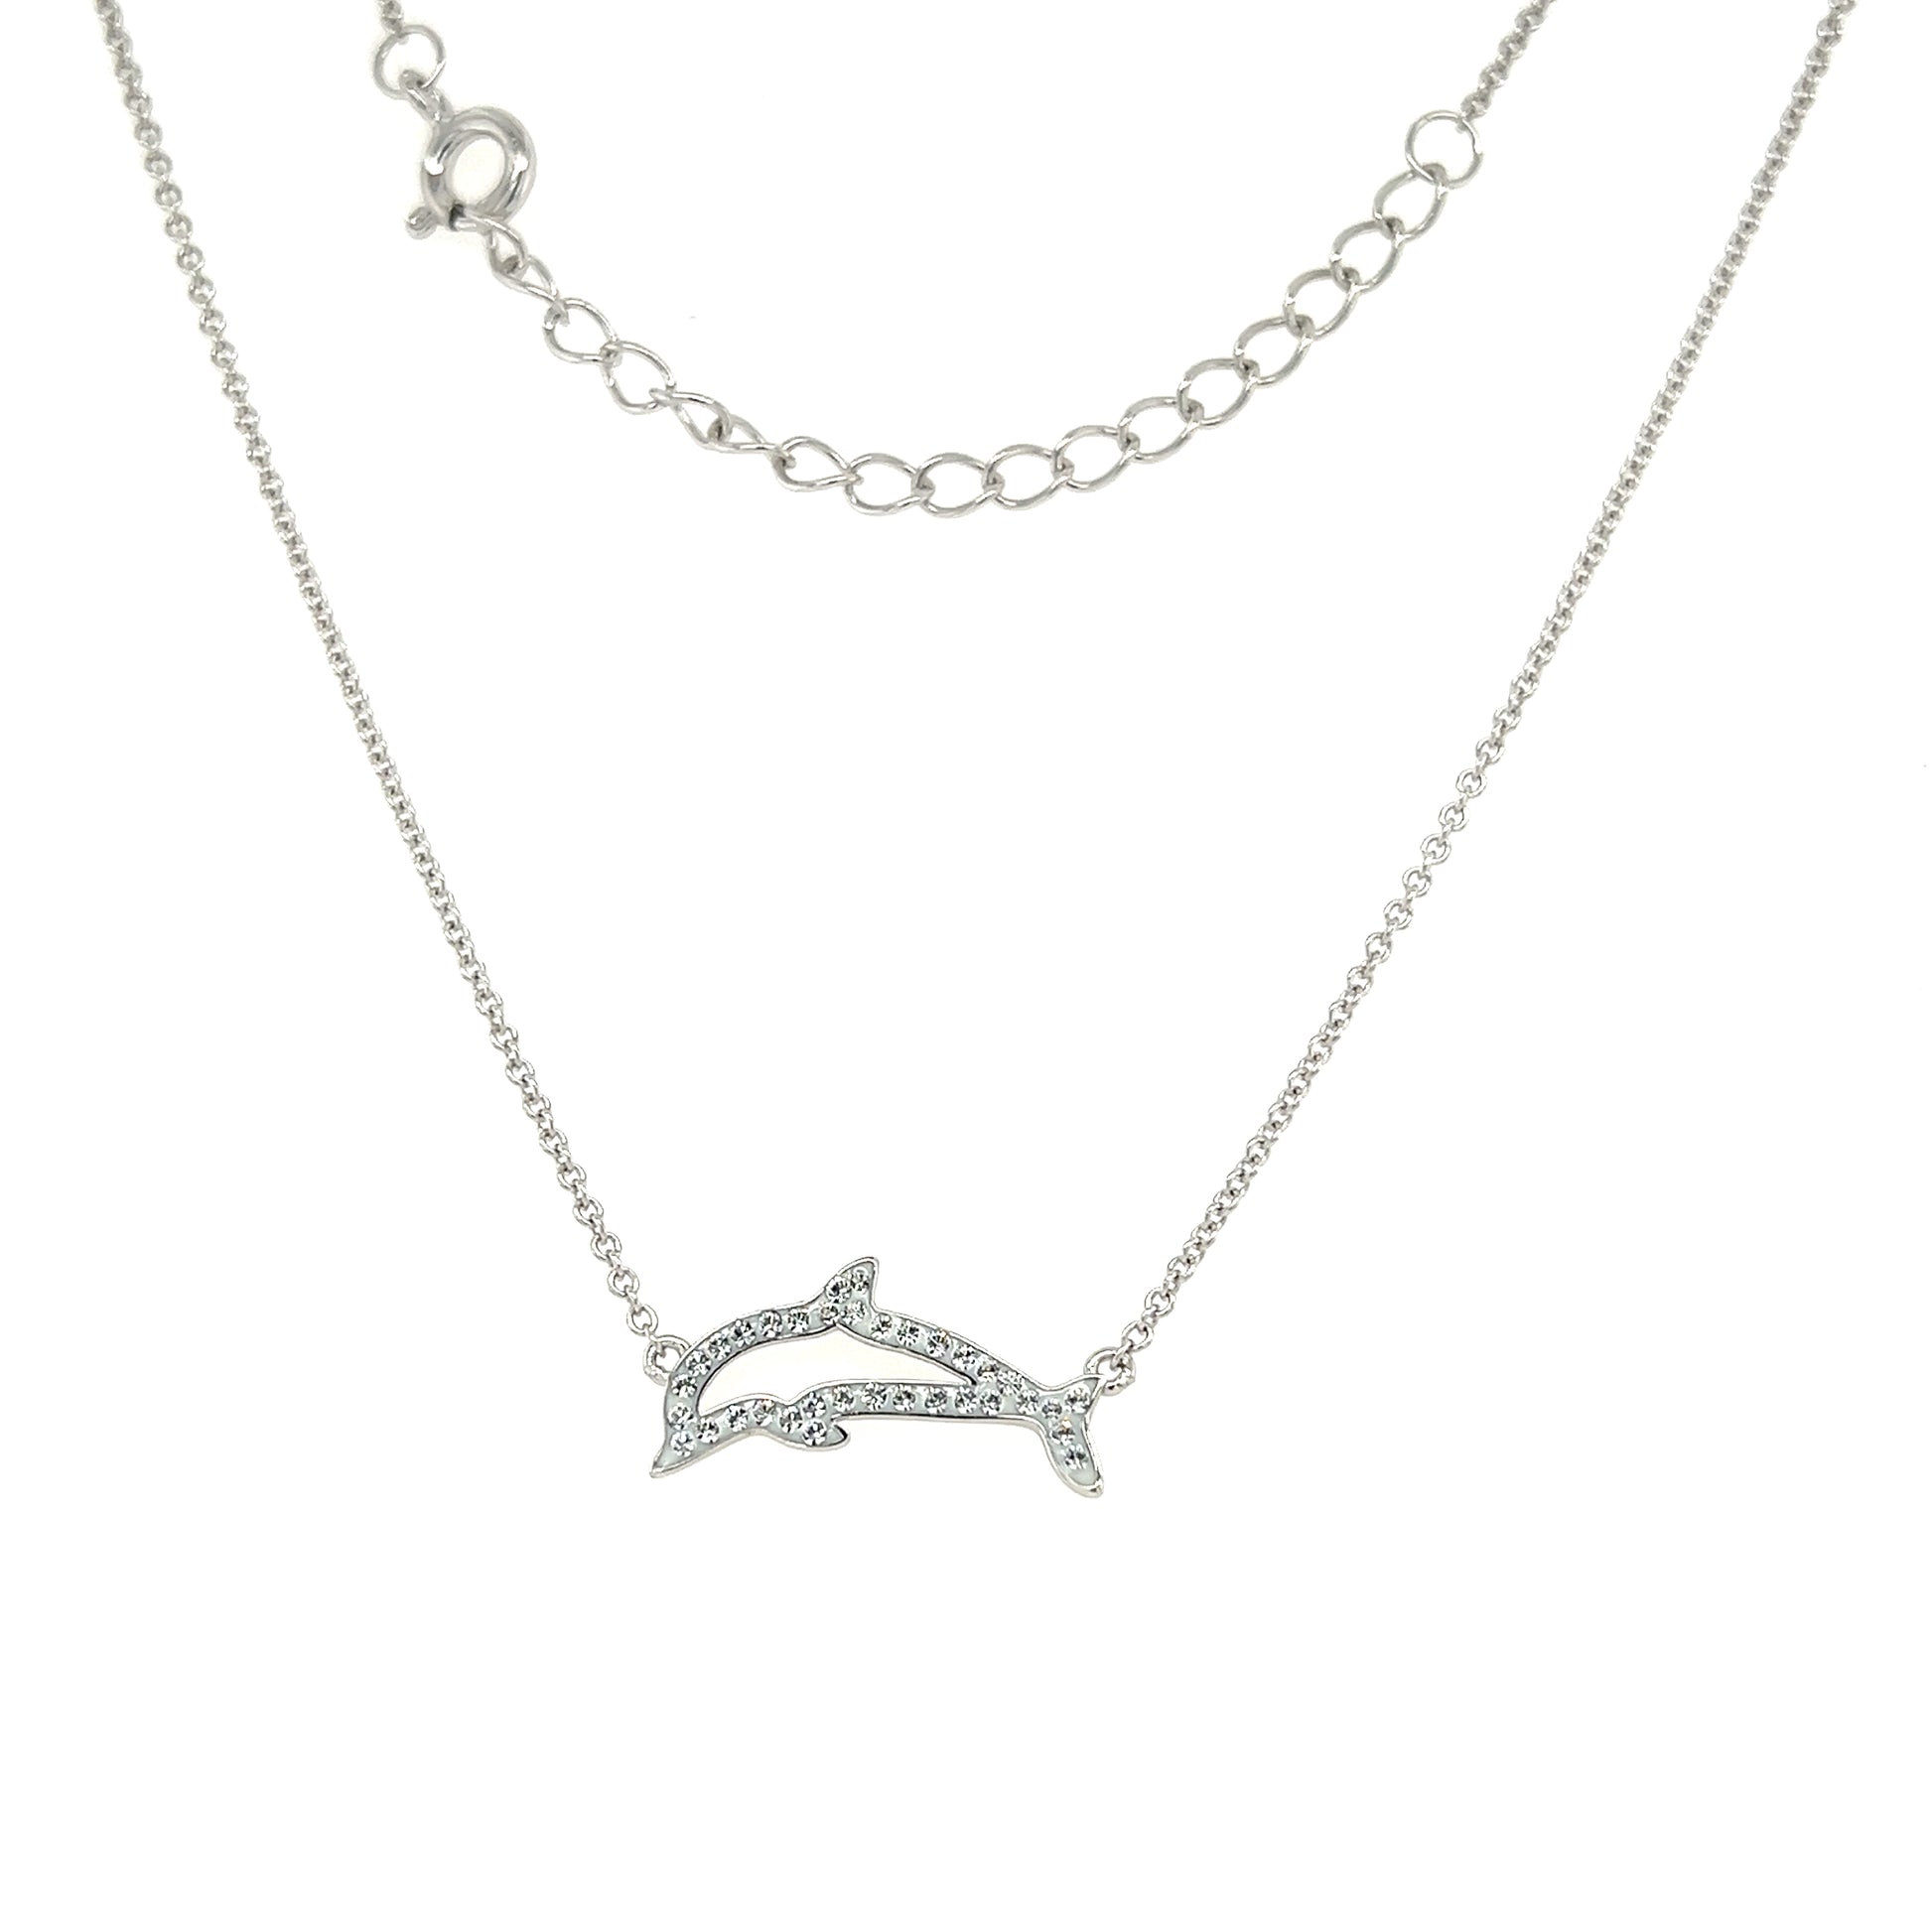 Dolphin Necklace with White Crystals in Sterling Silver Full necklace Front View